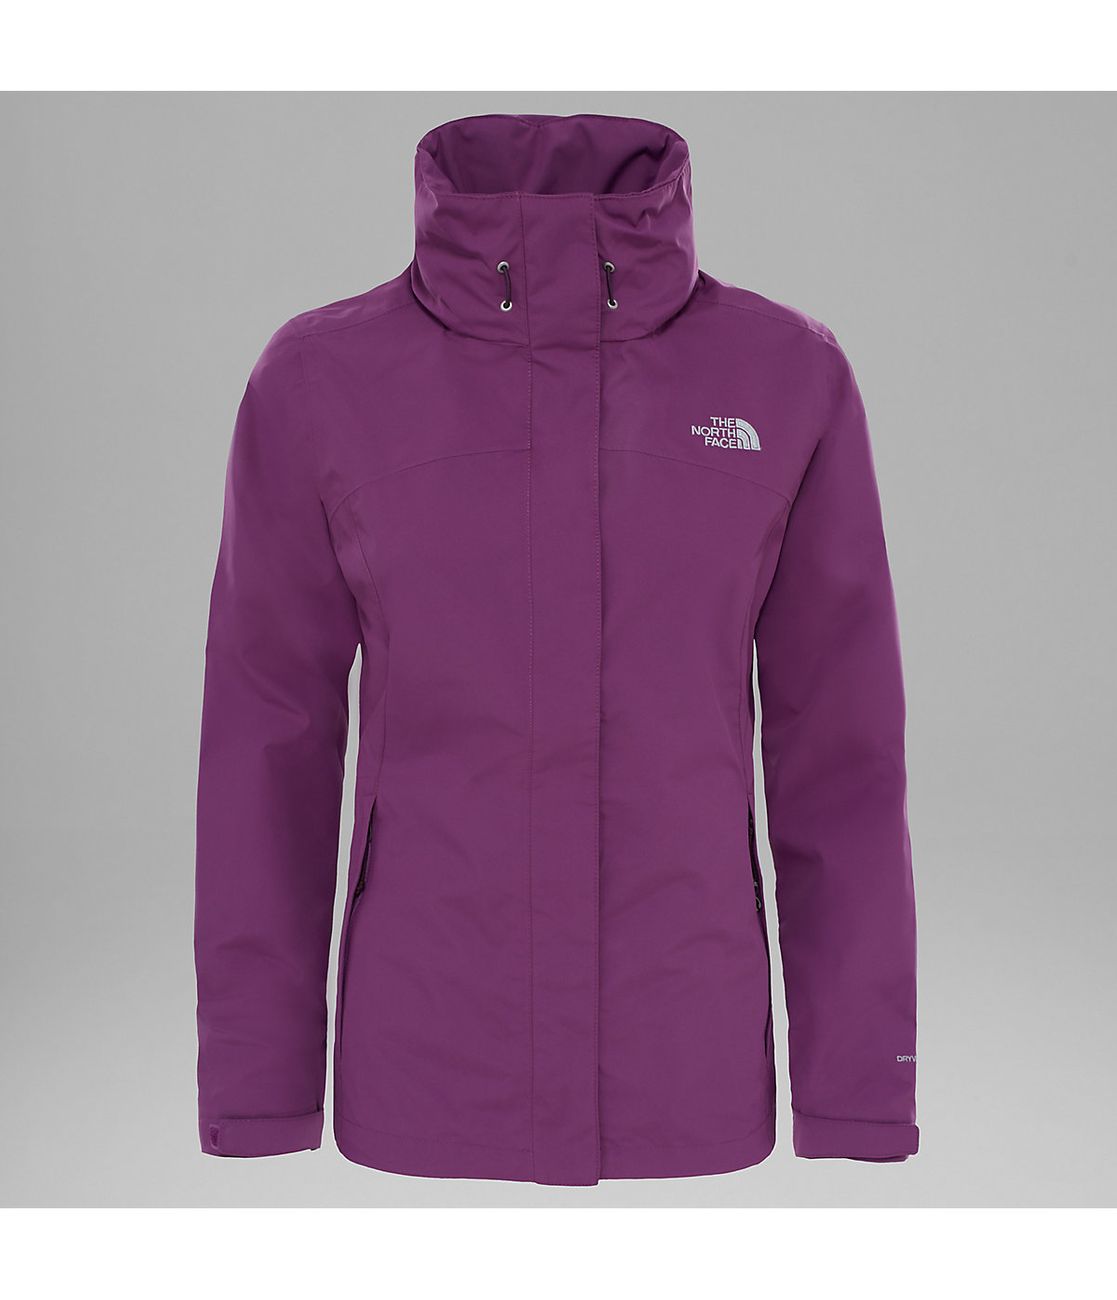 The North Face Damen Sommerjacke W Sangro Jacket - The North Face - SAGATOO - 190543117997